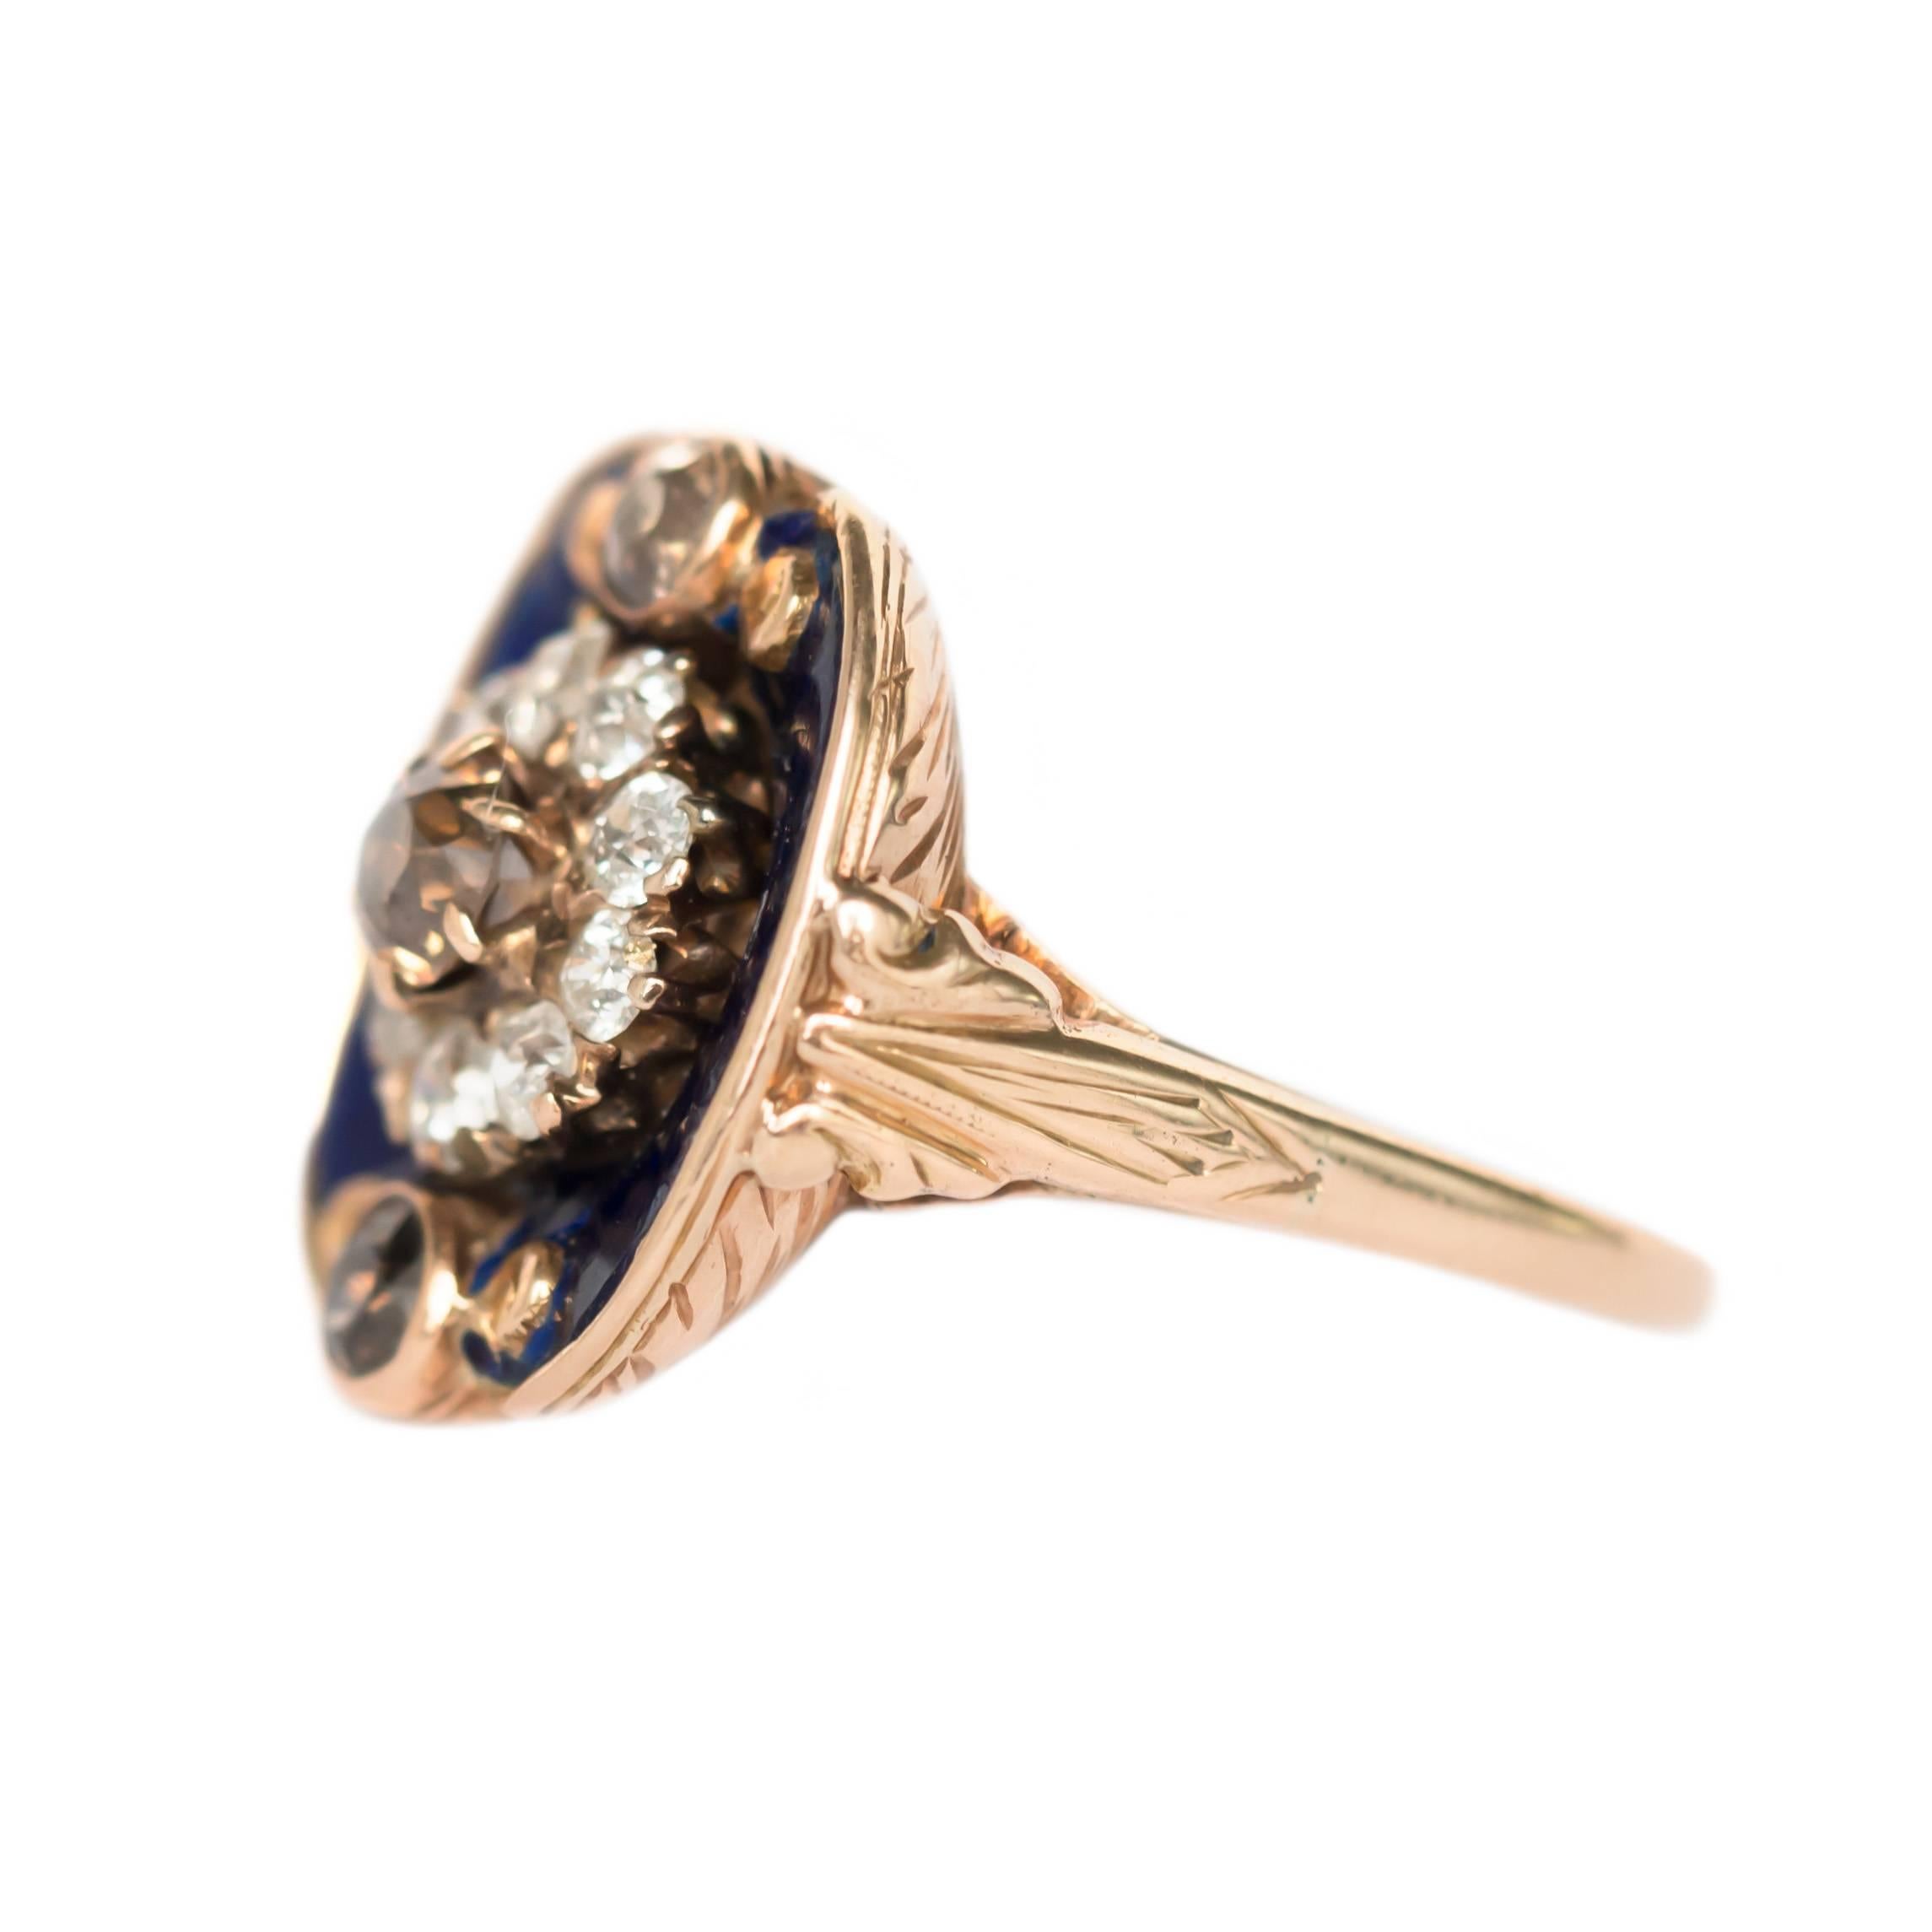 Item Details: 
Ring Size: 7.5
Metal Type: 14 Karat Yellow Gold 
Weight: 8.7 grams

Center Diamond Details
Shape: Old European Brilliant 
Carat Weight: .45 carat 
Color: Fancy Brown 
Clarity: SI2

Side Stone Details: 
Shape: Old European Brilliant